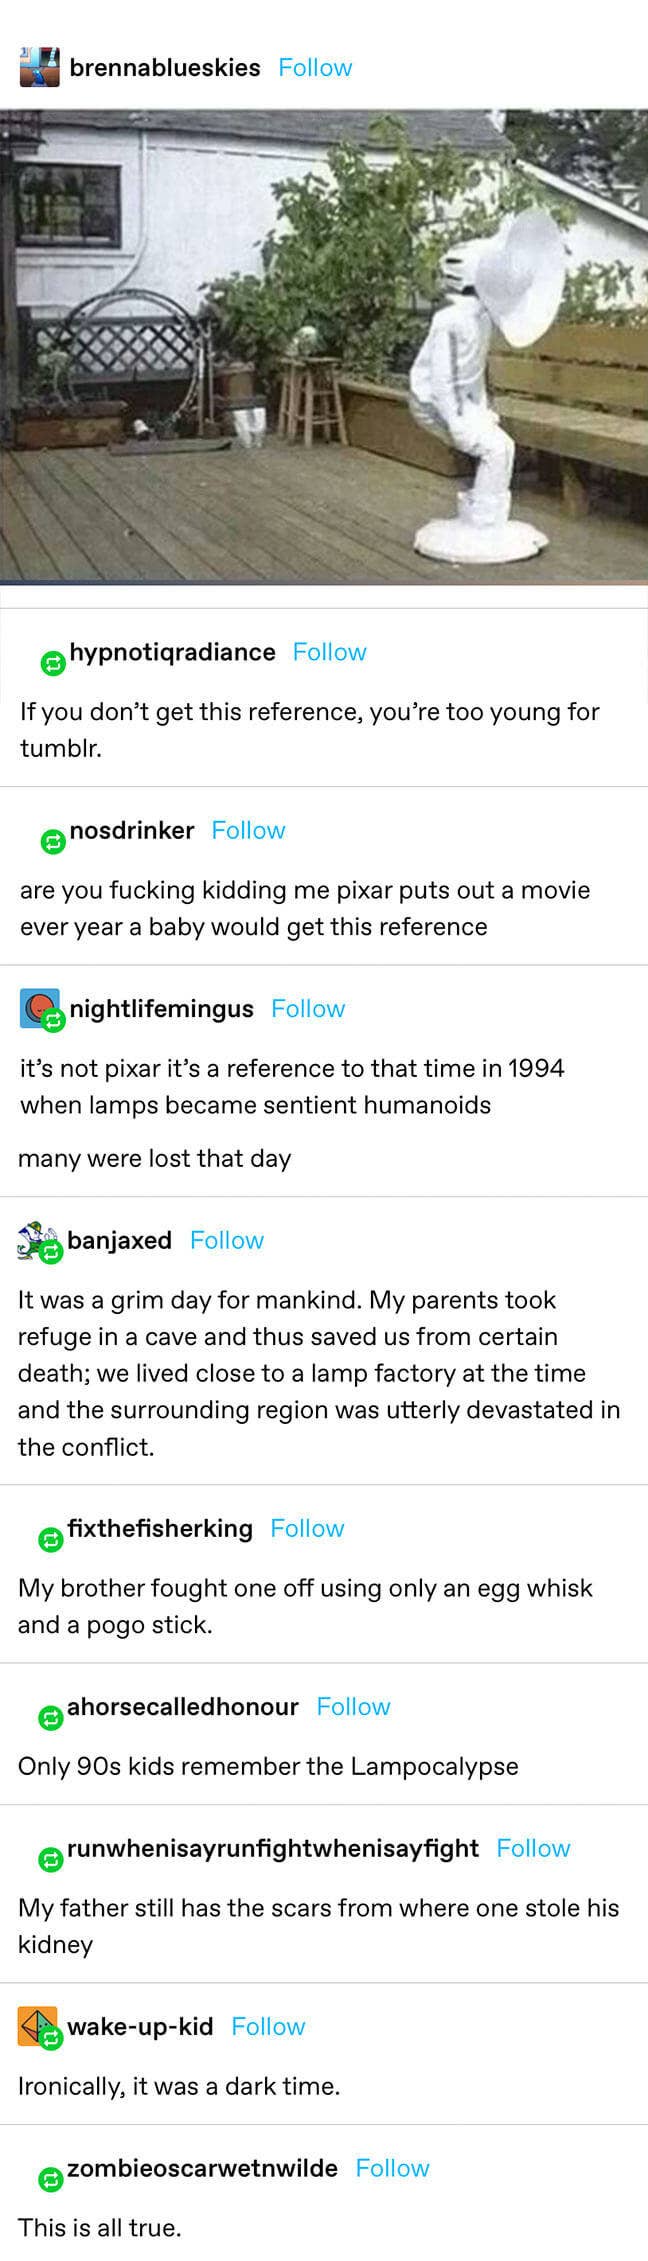 joke that starts with a pixar opening recreation then ends with people joking about a lamp-ocalypse where lamps actually attacked people